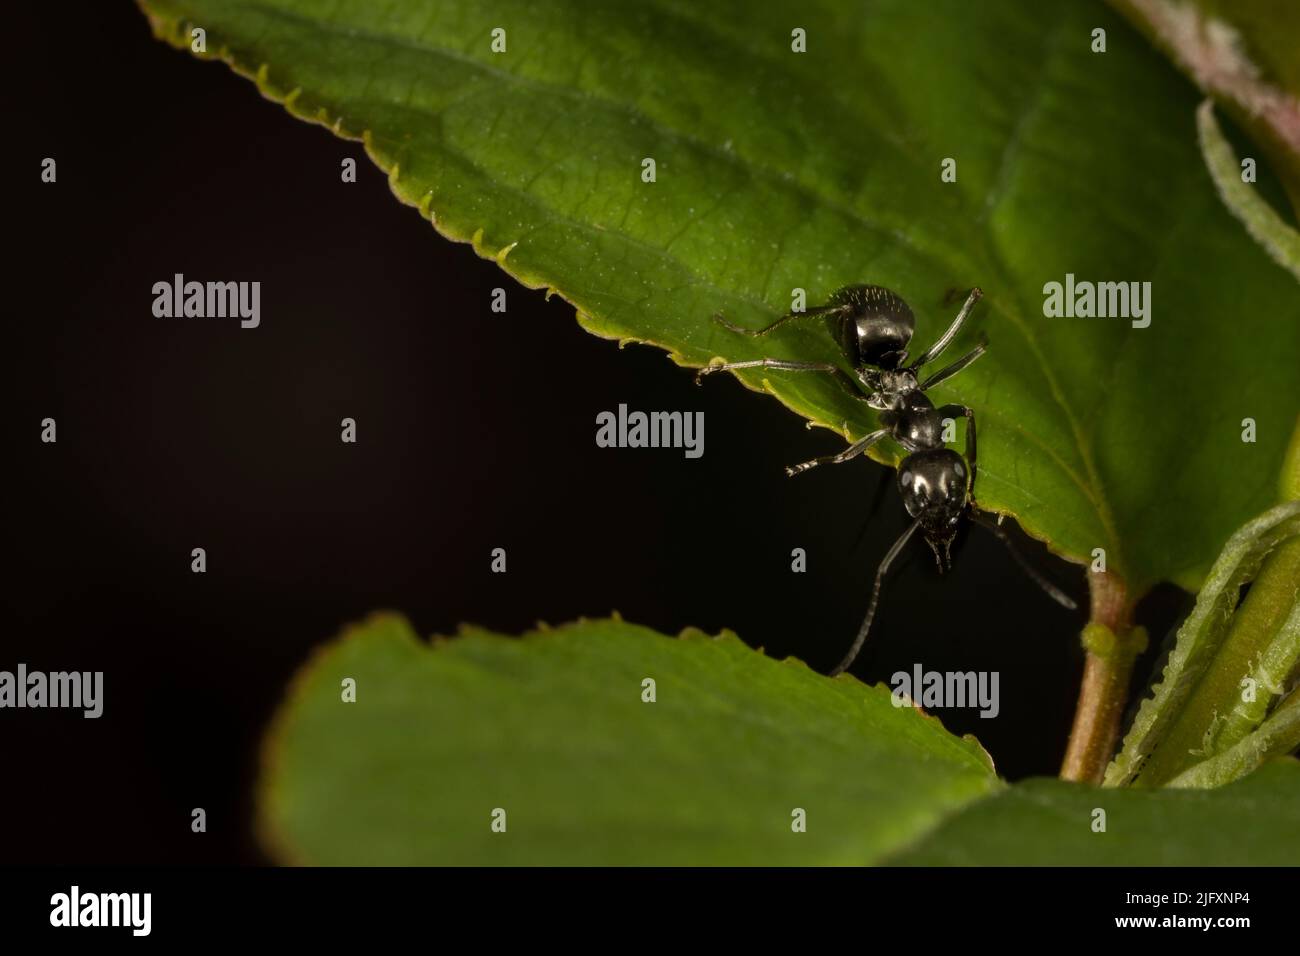 Close-up of a Black carpenter ant going from leaf to leaf in a backyard Stock Photo